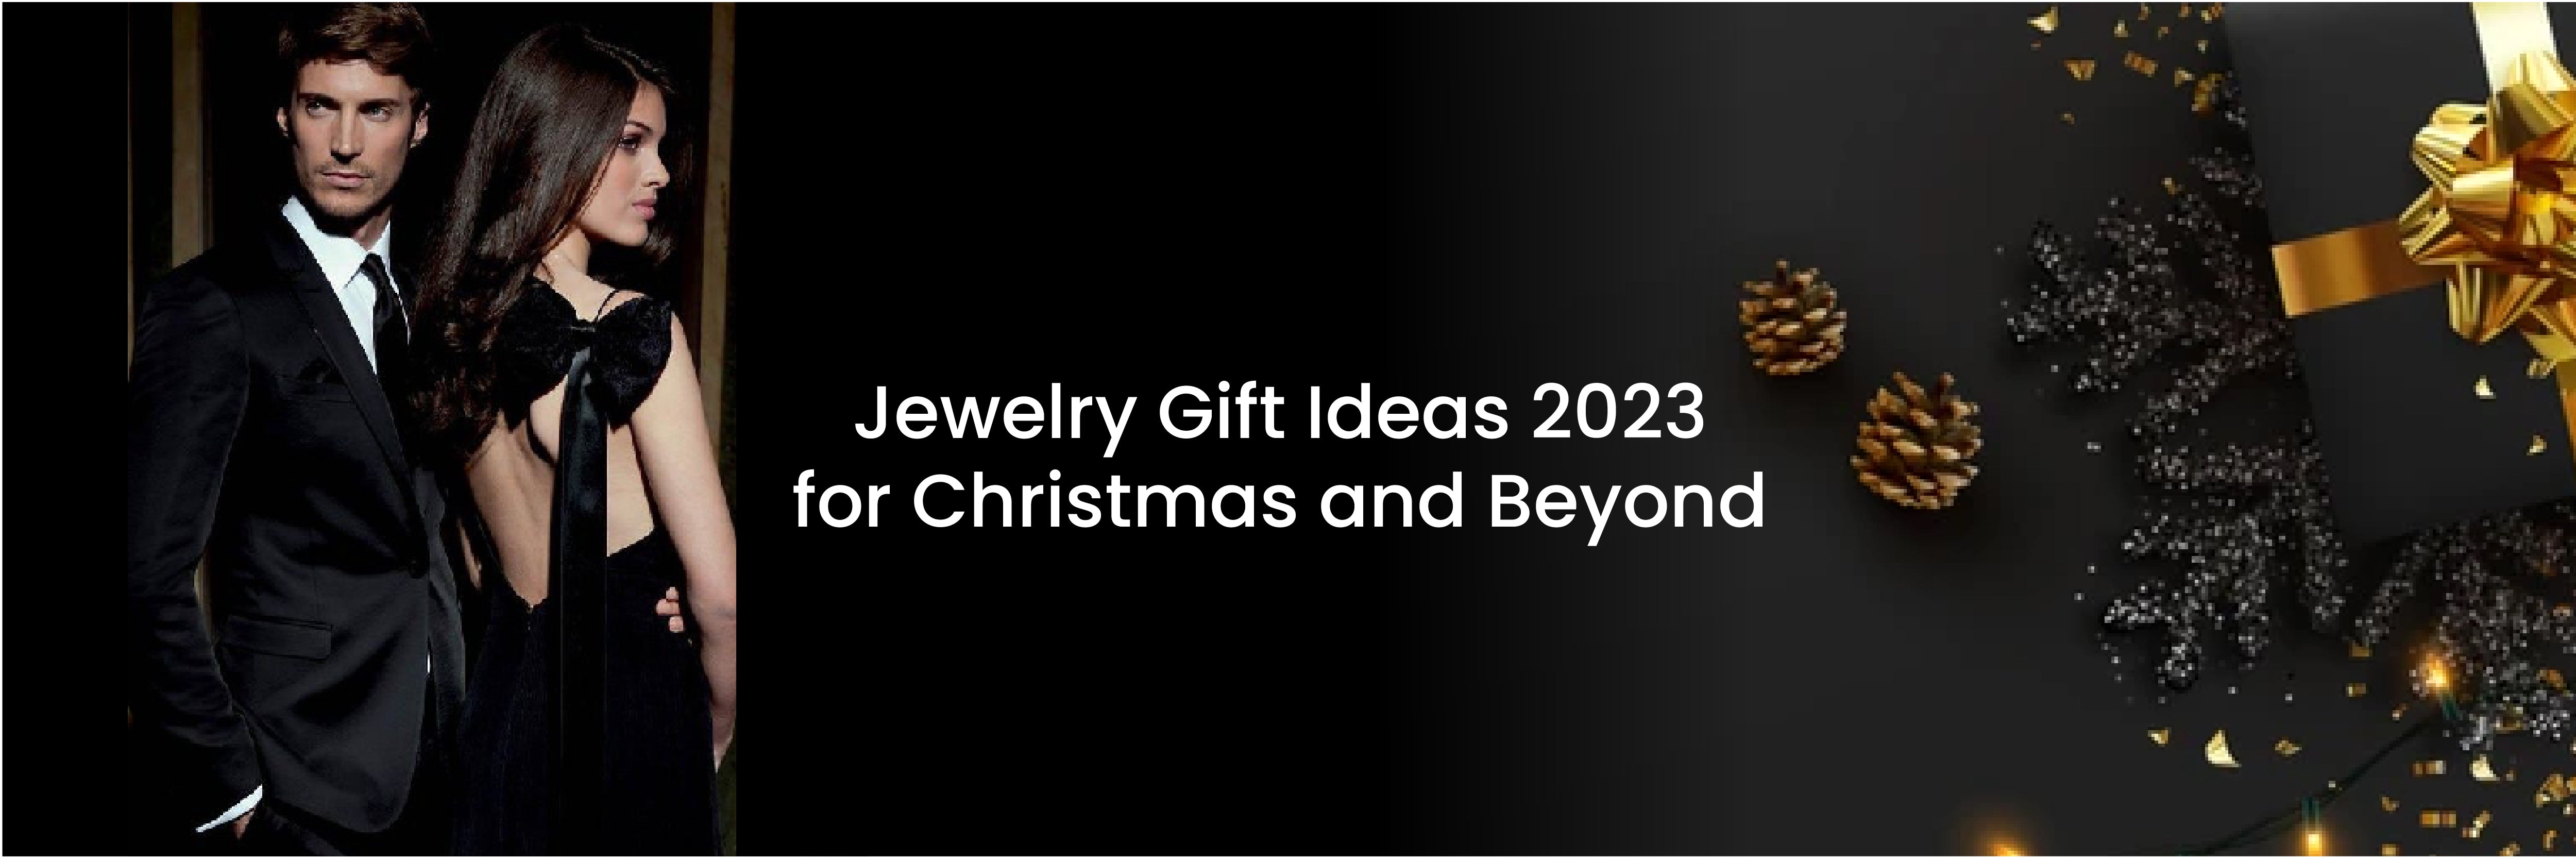 Top 18 Jewelry Gift Ideas 2023 for Christmas